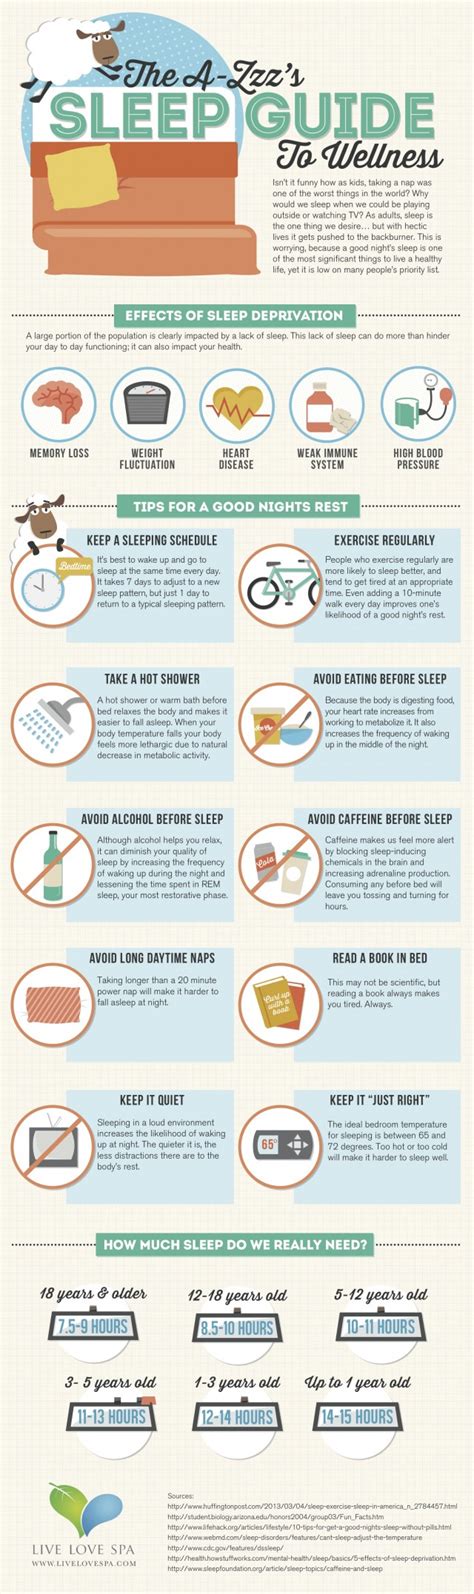 Sleep Deprivation Effects And Tips To Sleep Better Infographic